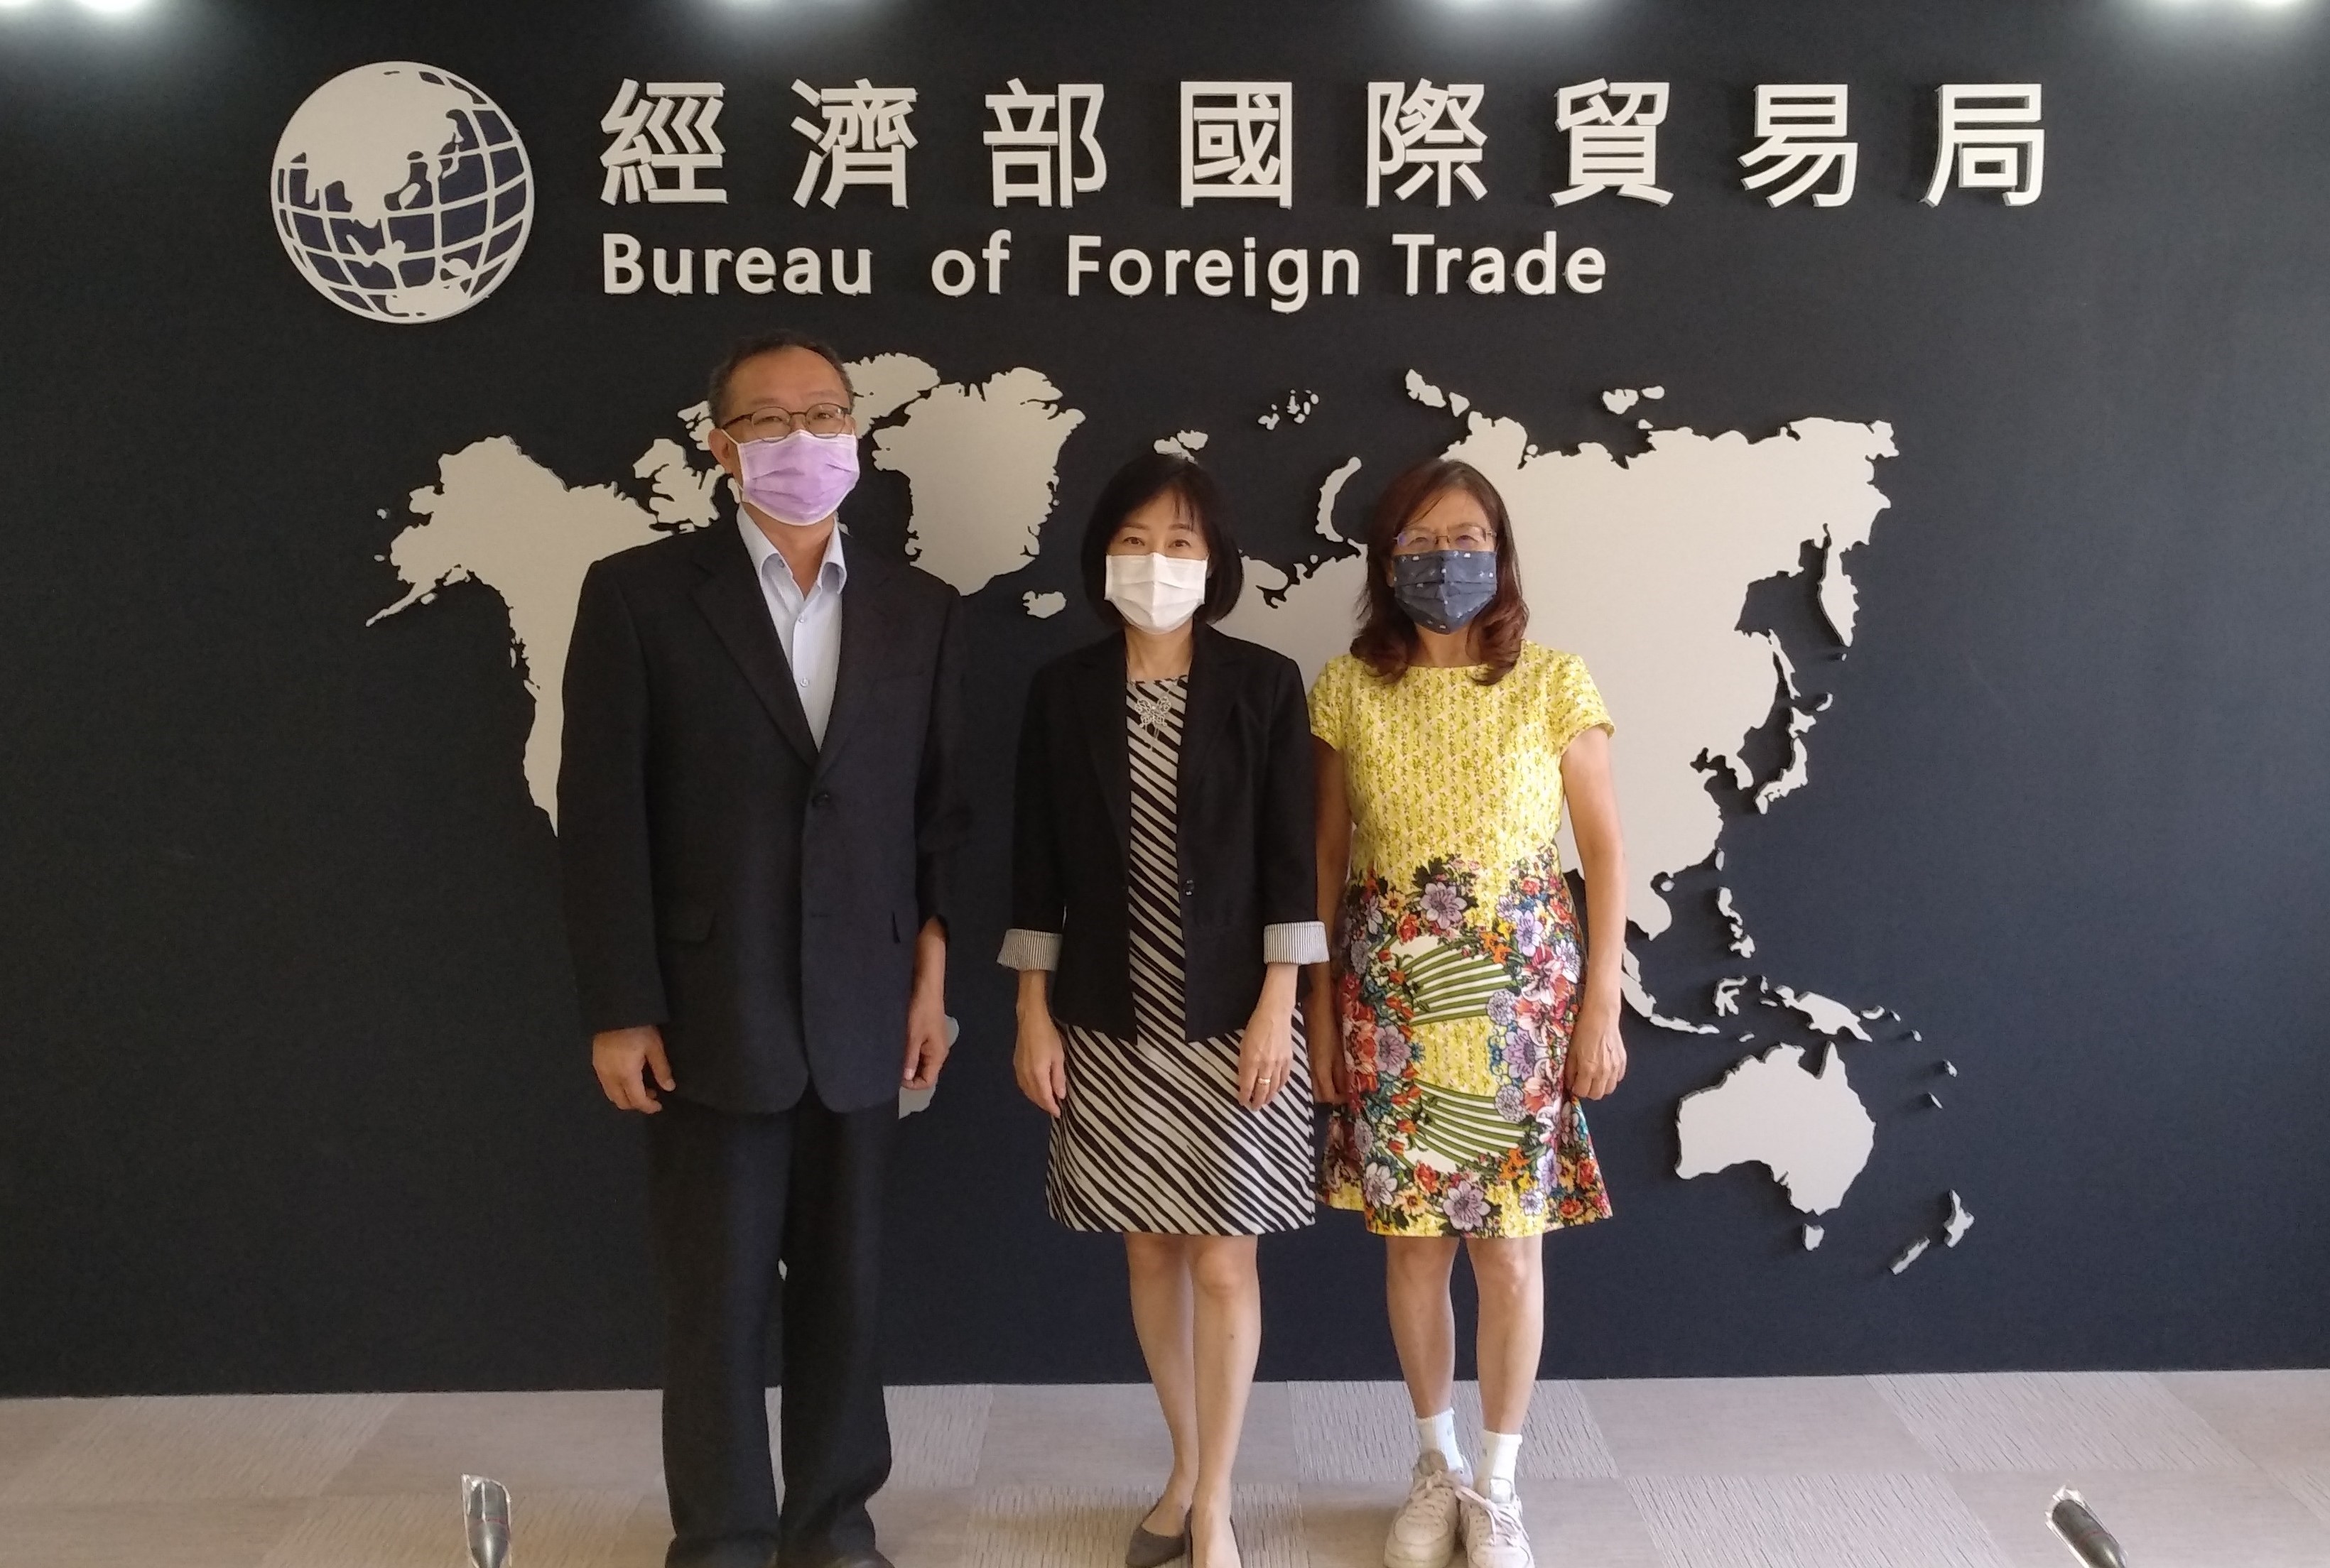 Director General Kiang  Met 2 Association Leaders to Discuss “Taiwan Food Machinery Marketing Meeting on Trade Promotion in African Countries”